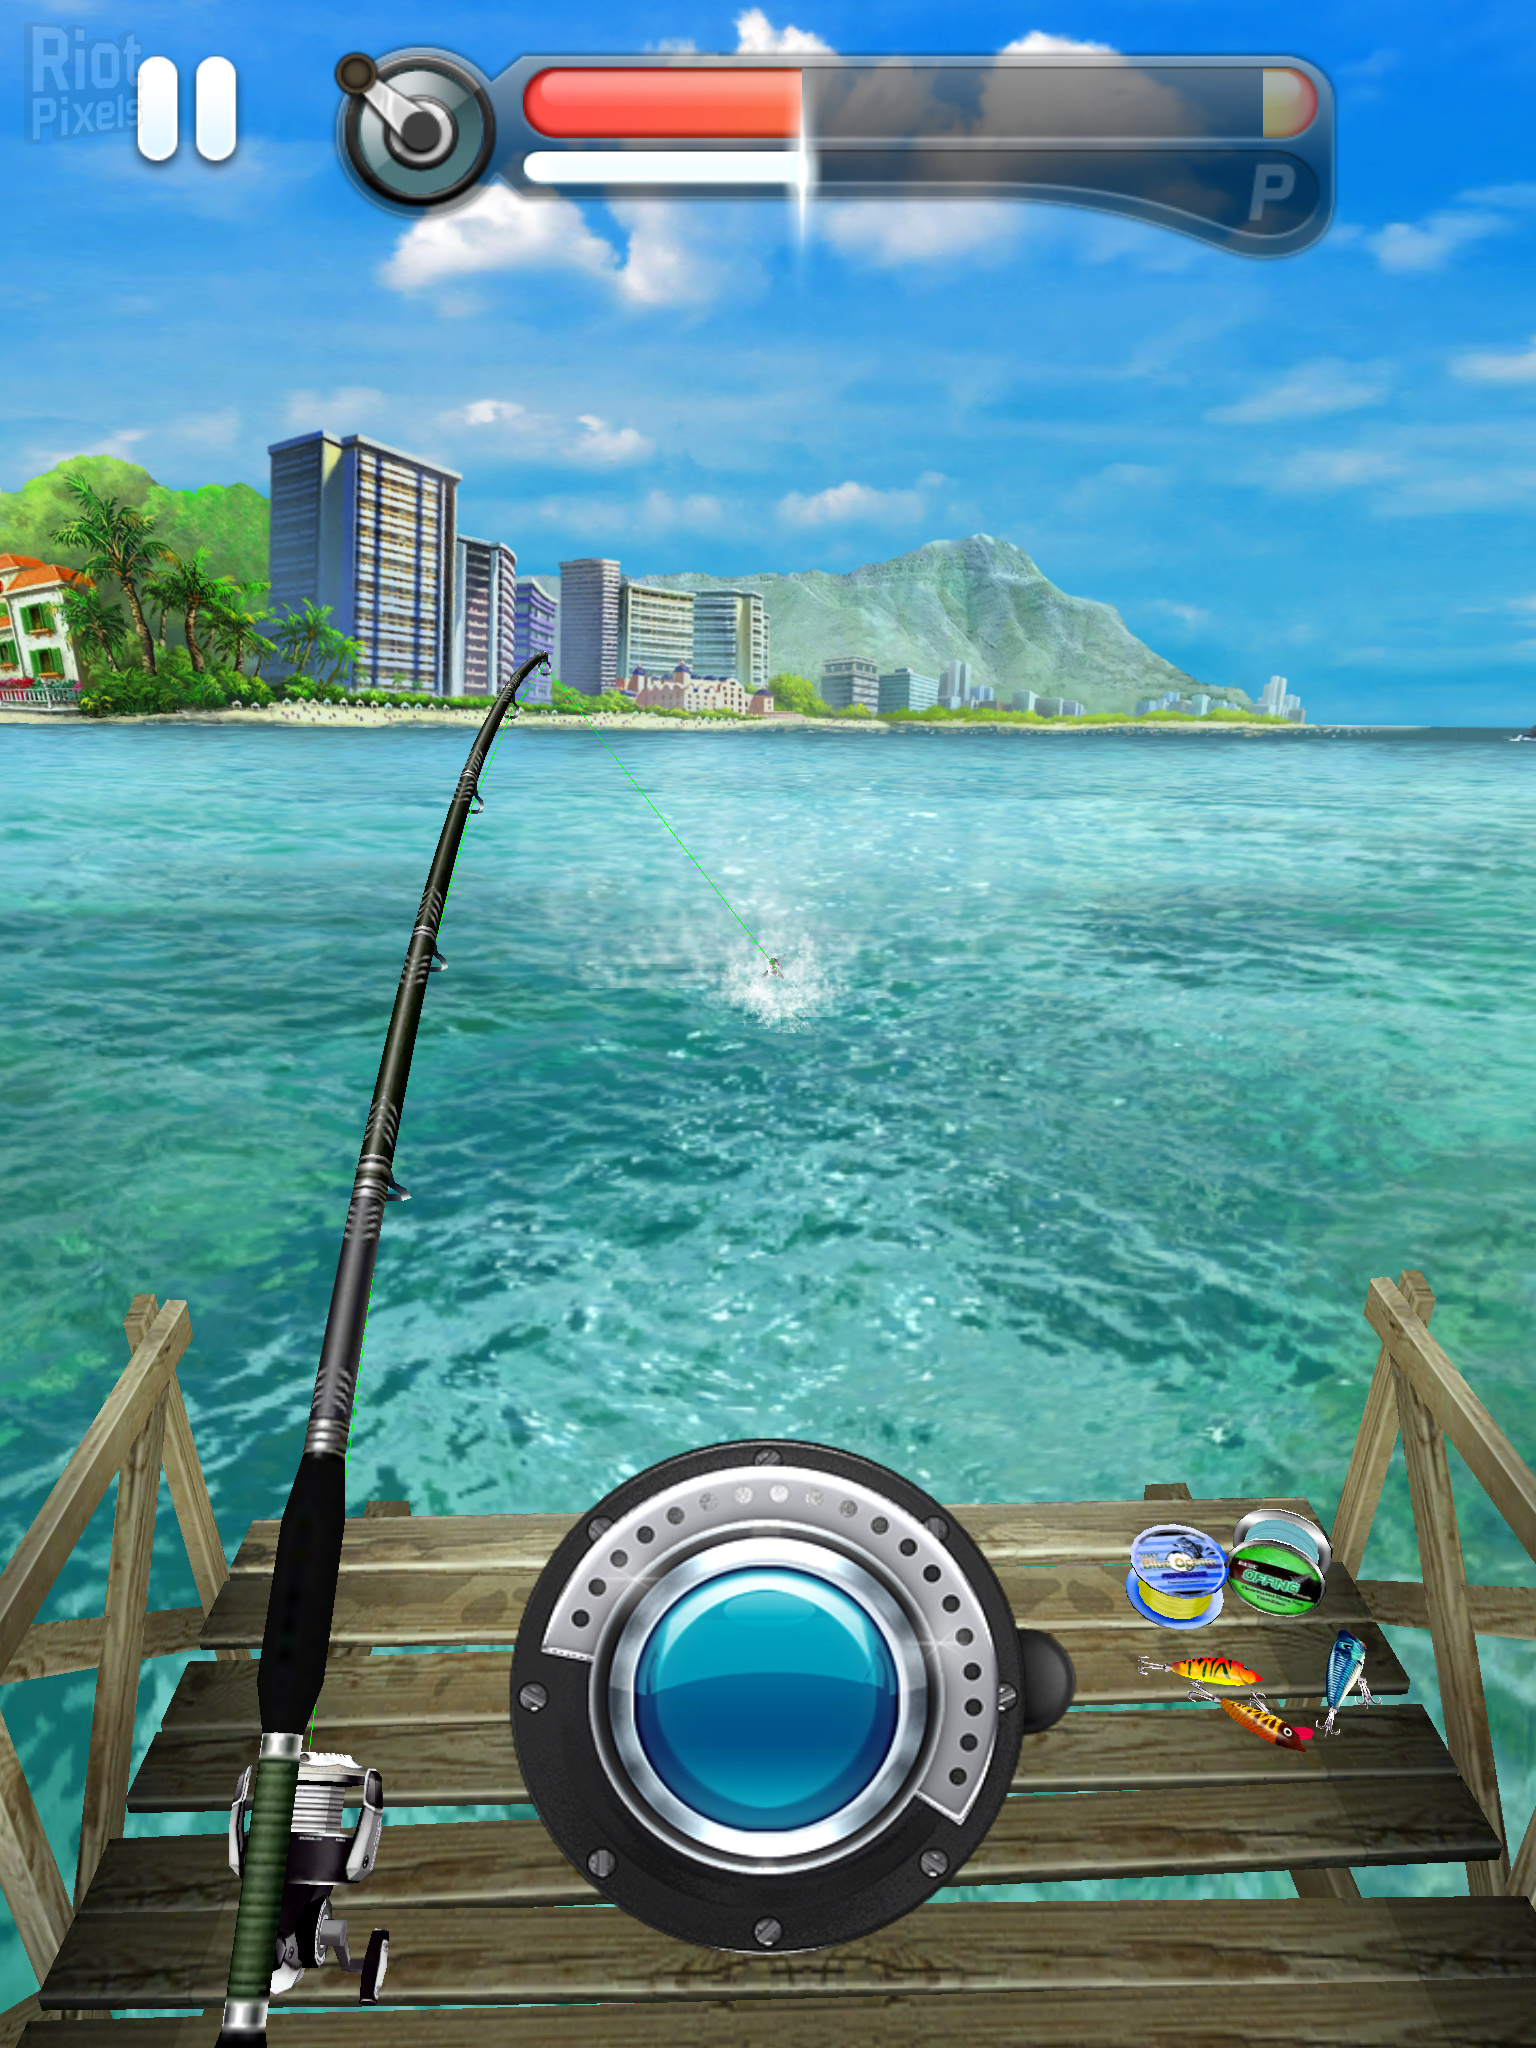 Ace Fishing: Wild Catch - game screenshots at Riot Pixels, images